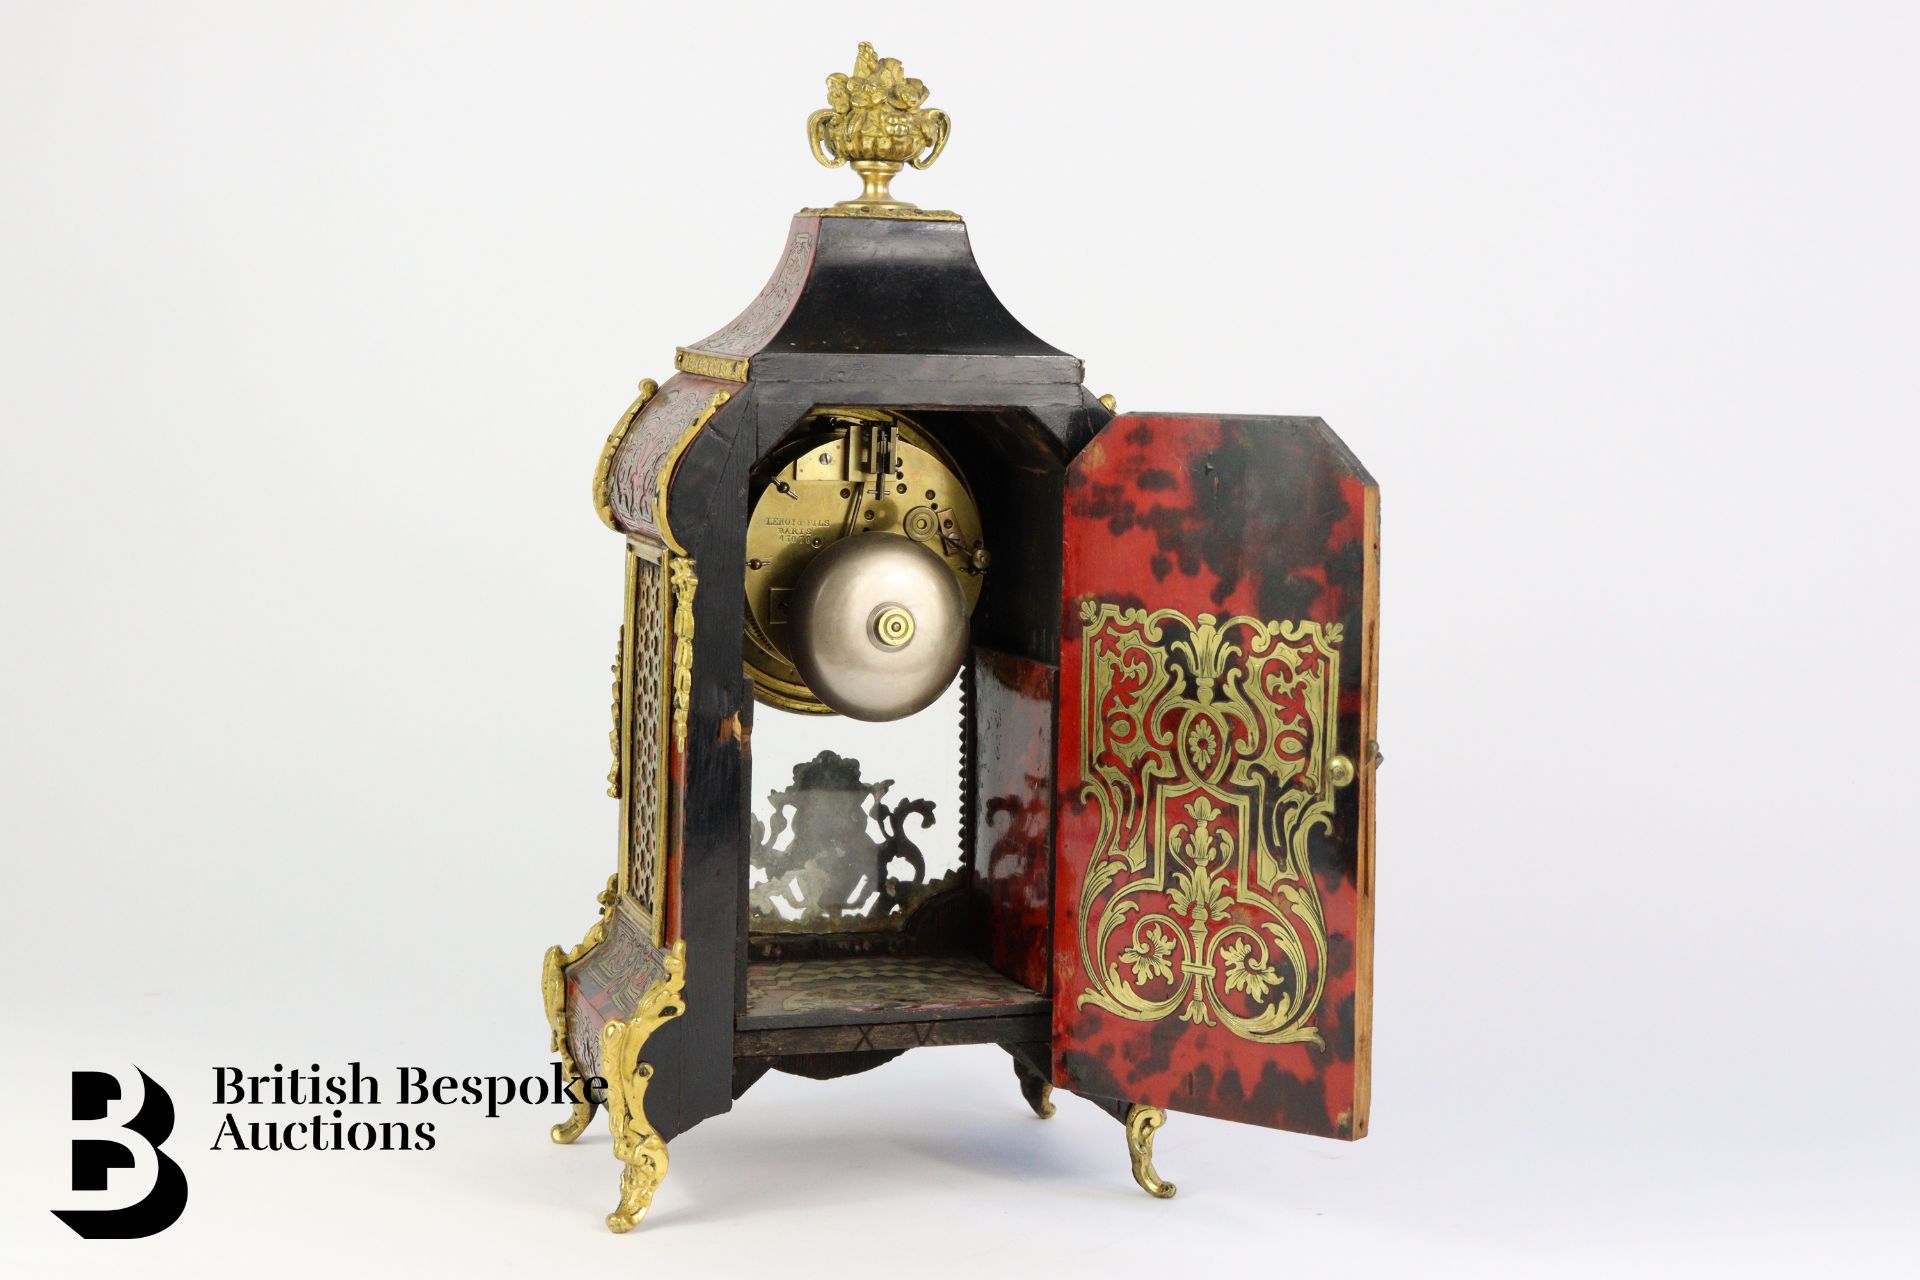 French Boulle Mantel Clock - Image 6 of 9